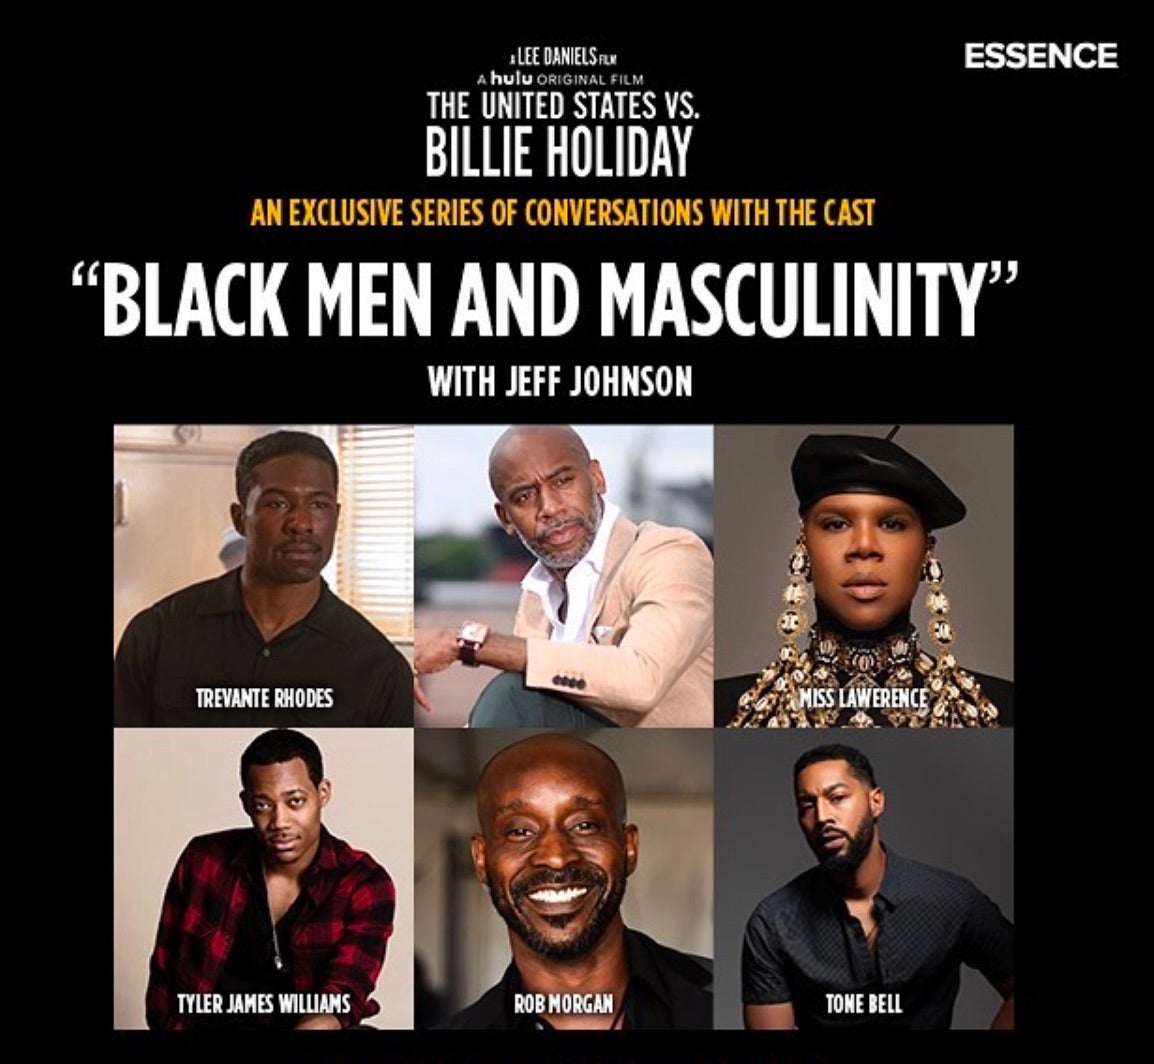 7 Lessons On Black Male Masculinity From The Men Of 'The United States vs. Billie Holiday'